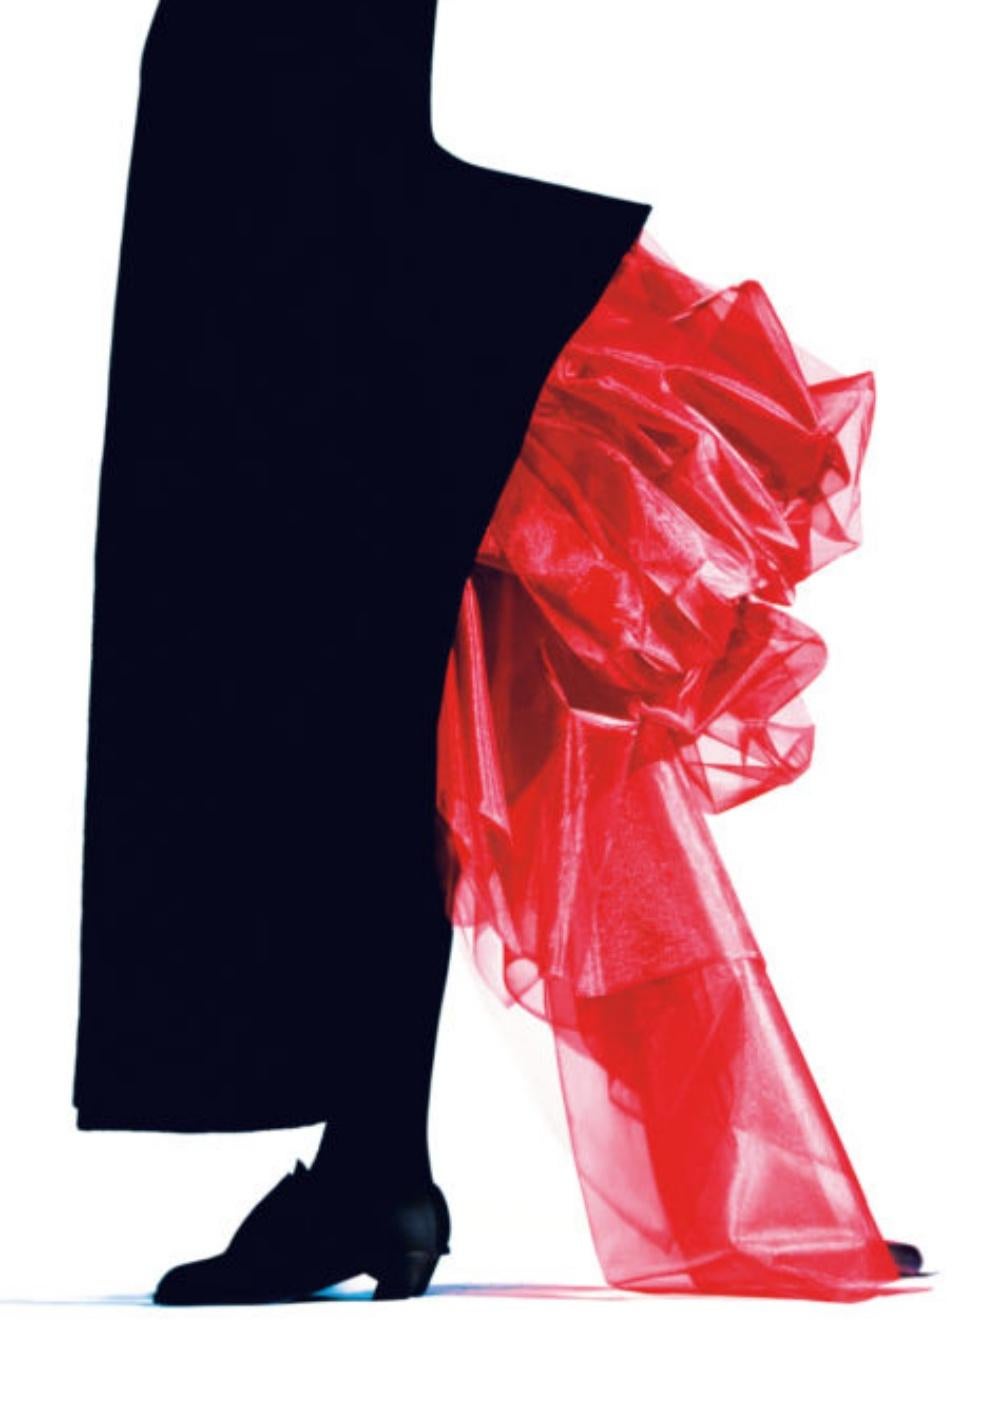 NICK KNIGHT (*1958, Great Britain) 
Red Bustle, Yohji Yamamoto, 1986/2010
Hand-coated pigment print
Sheet 101.6 x 76.2 cm (40 x 30 in.)
Edition of 10, plus 2 AP; Ed. no. 3/10
Print only

Nick Knight is among the world’s most influential and